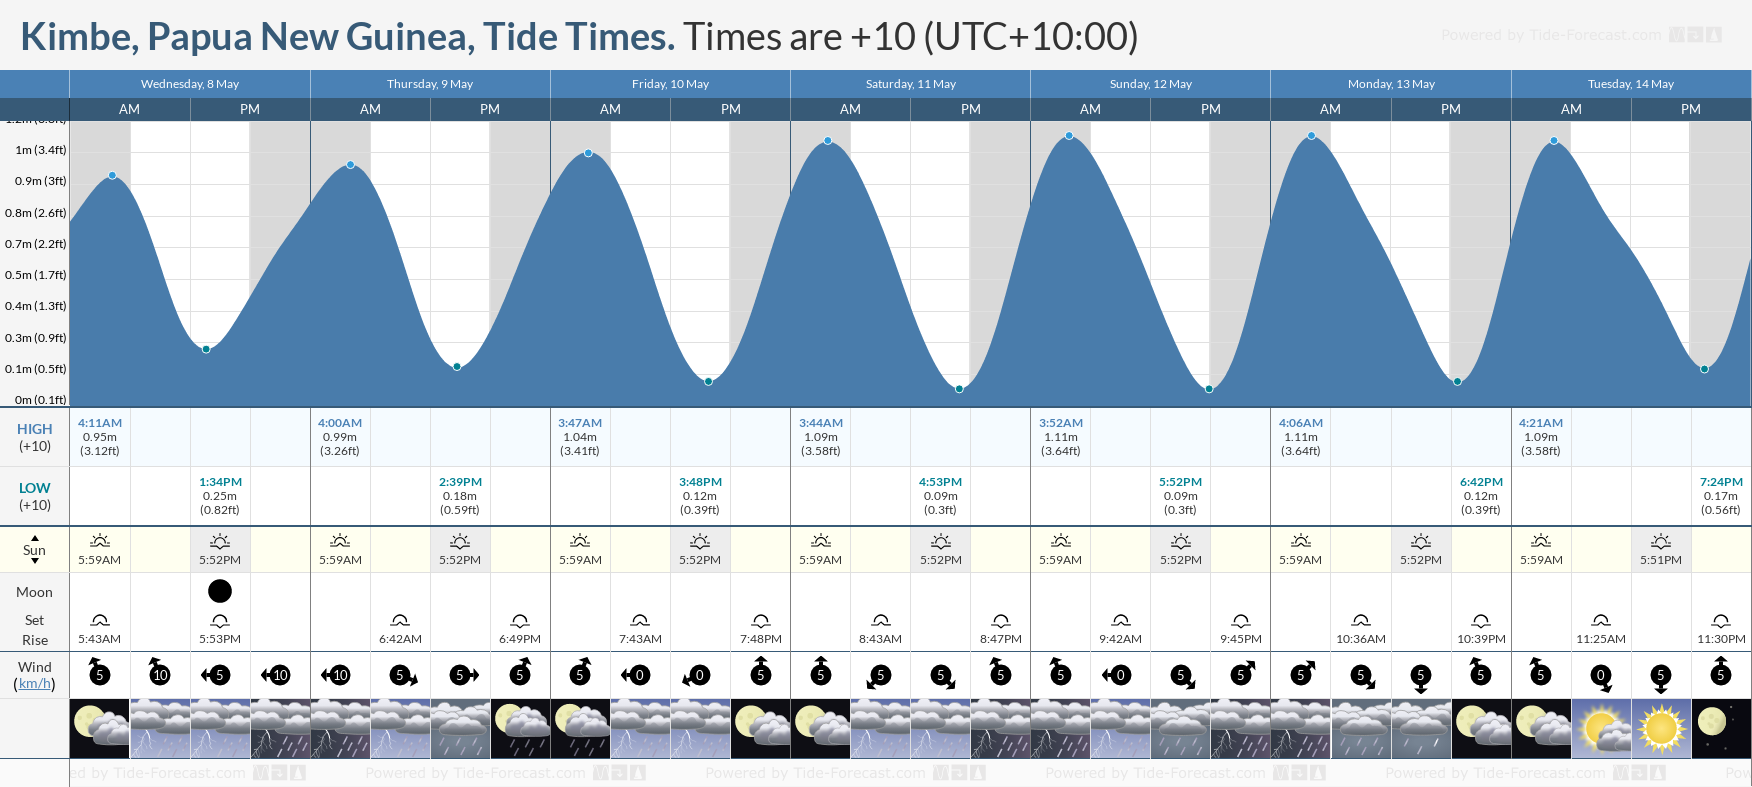 Kimbe, Papua New Guinea Tide Chart including high and low tide times for the next 7 days